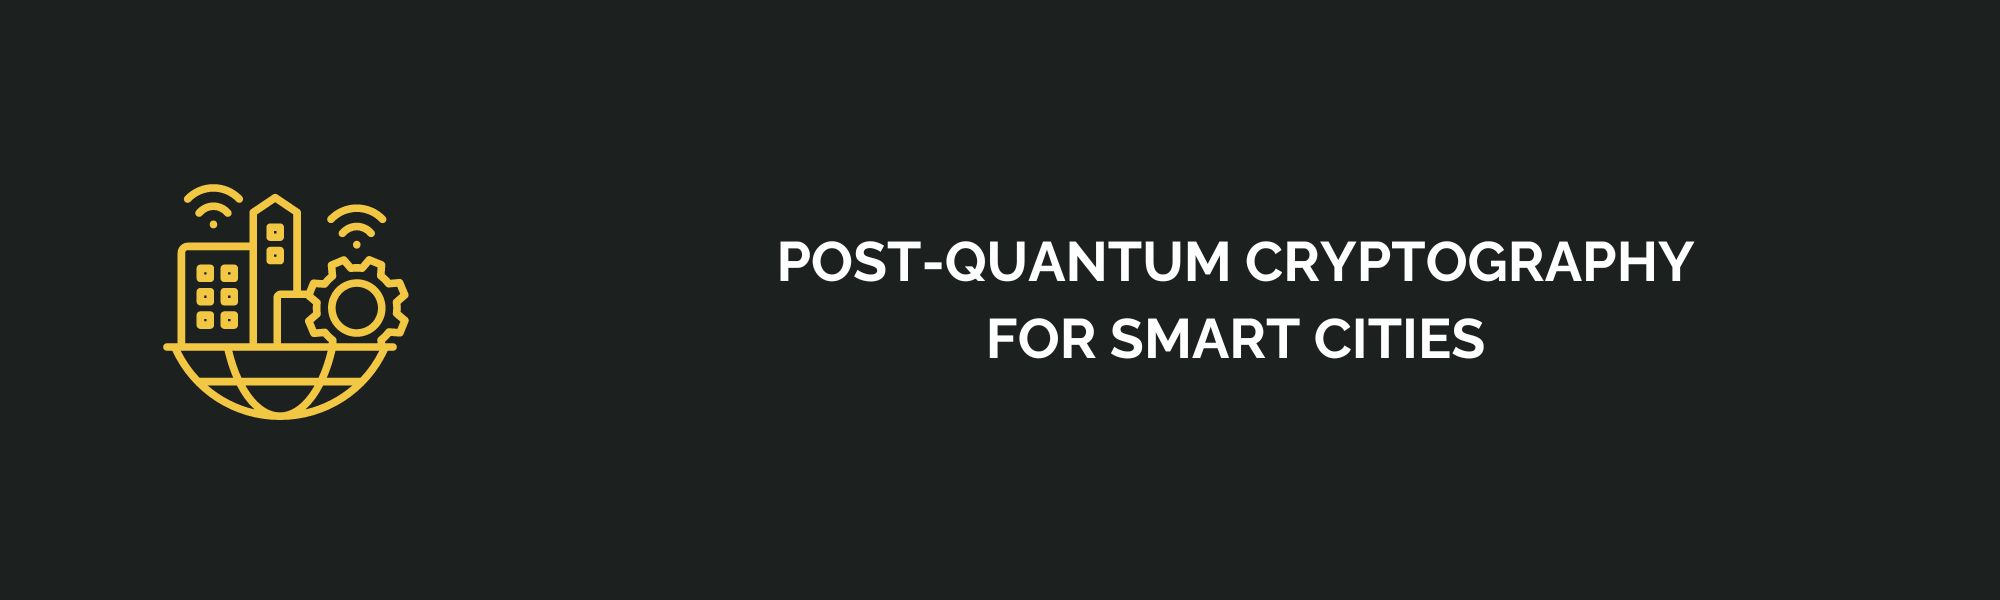 Post-Quantum Cryptography for Smart Cities